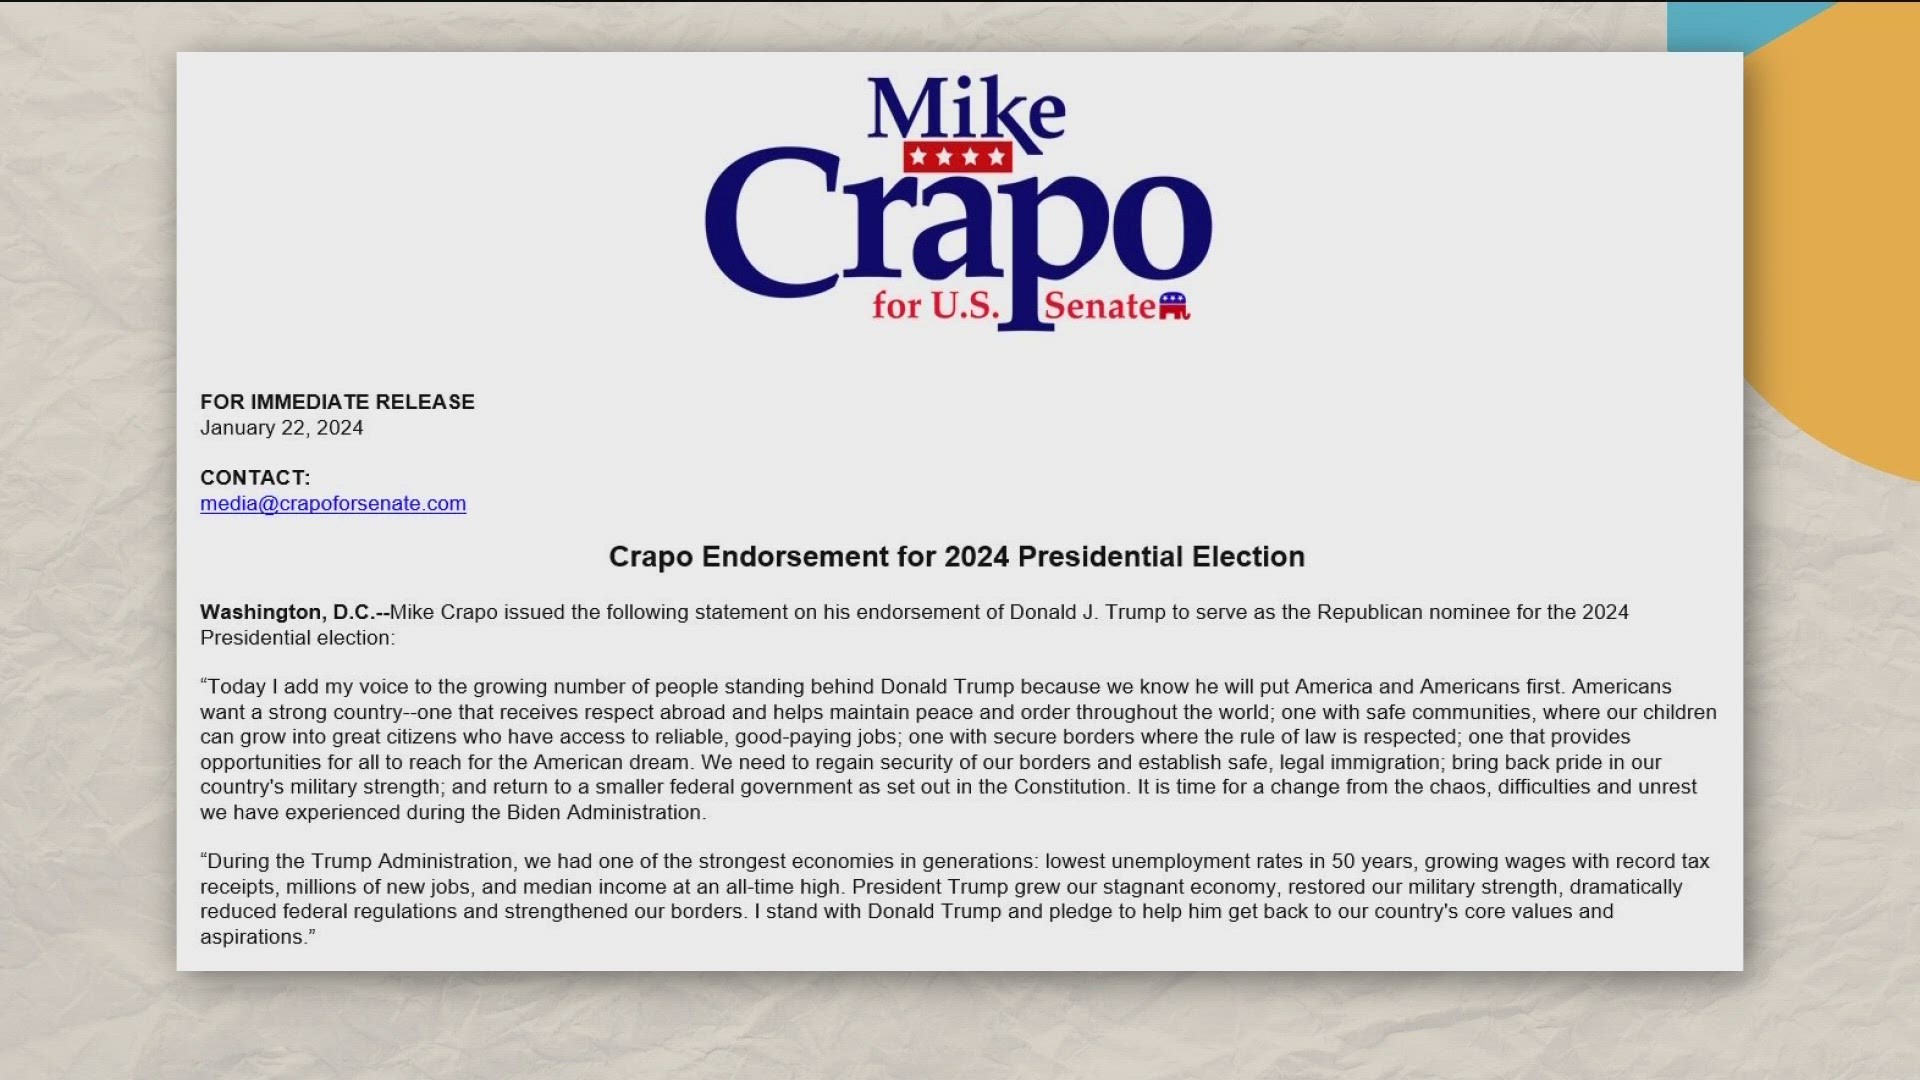 Crapo recently announced his endorsement for Trump, contradicting a his statements regarding the election in October of 2016.